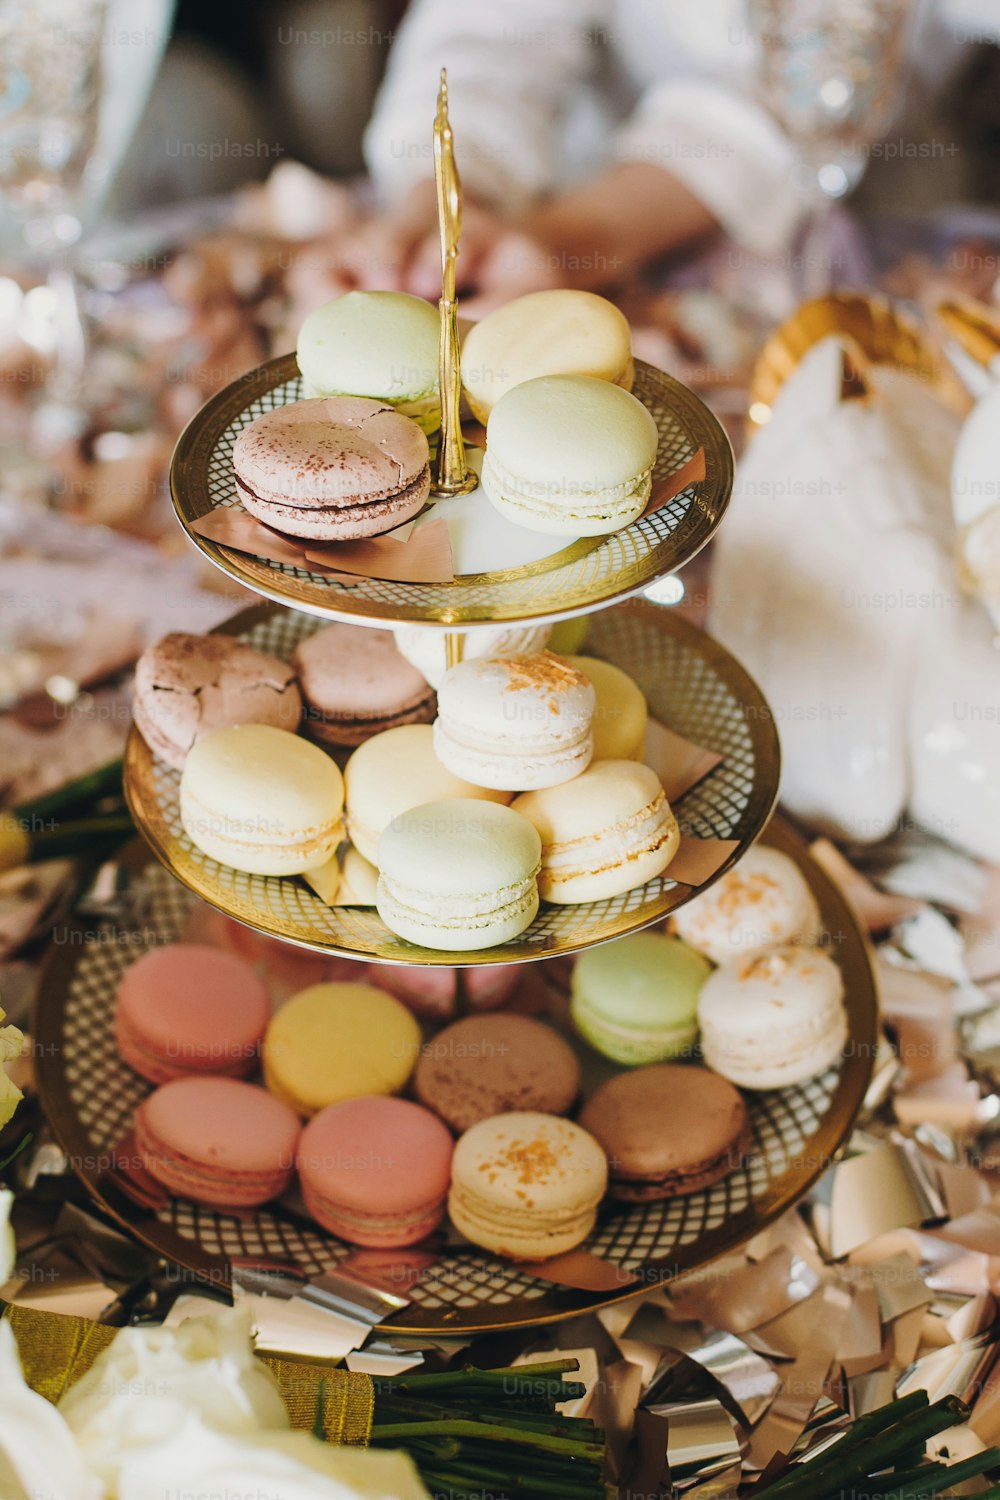 Delicious colorful macarons on beautiful vintage stand with gold ornaments on table with gold and silver confetti. Luxury catering. Bridal hen or baby shower. French dessert macaroons